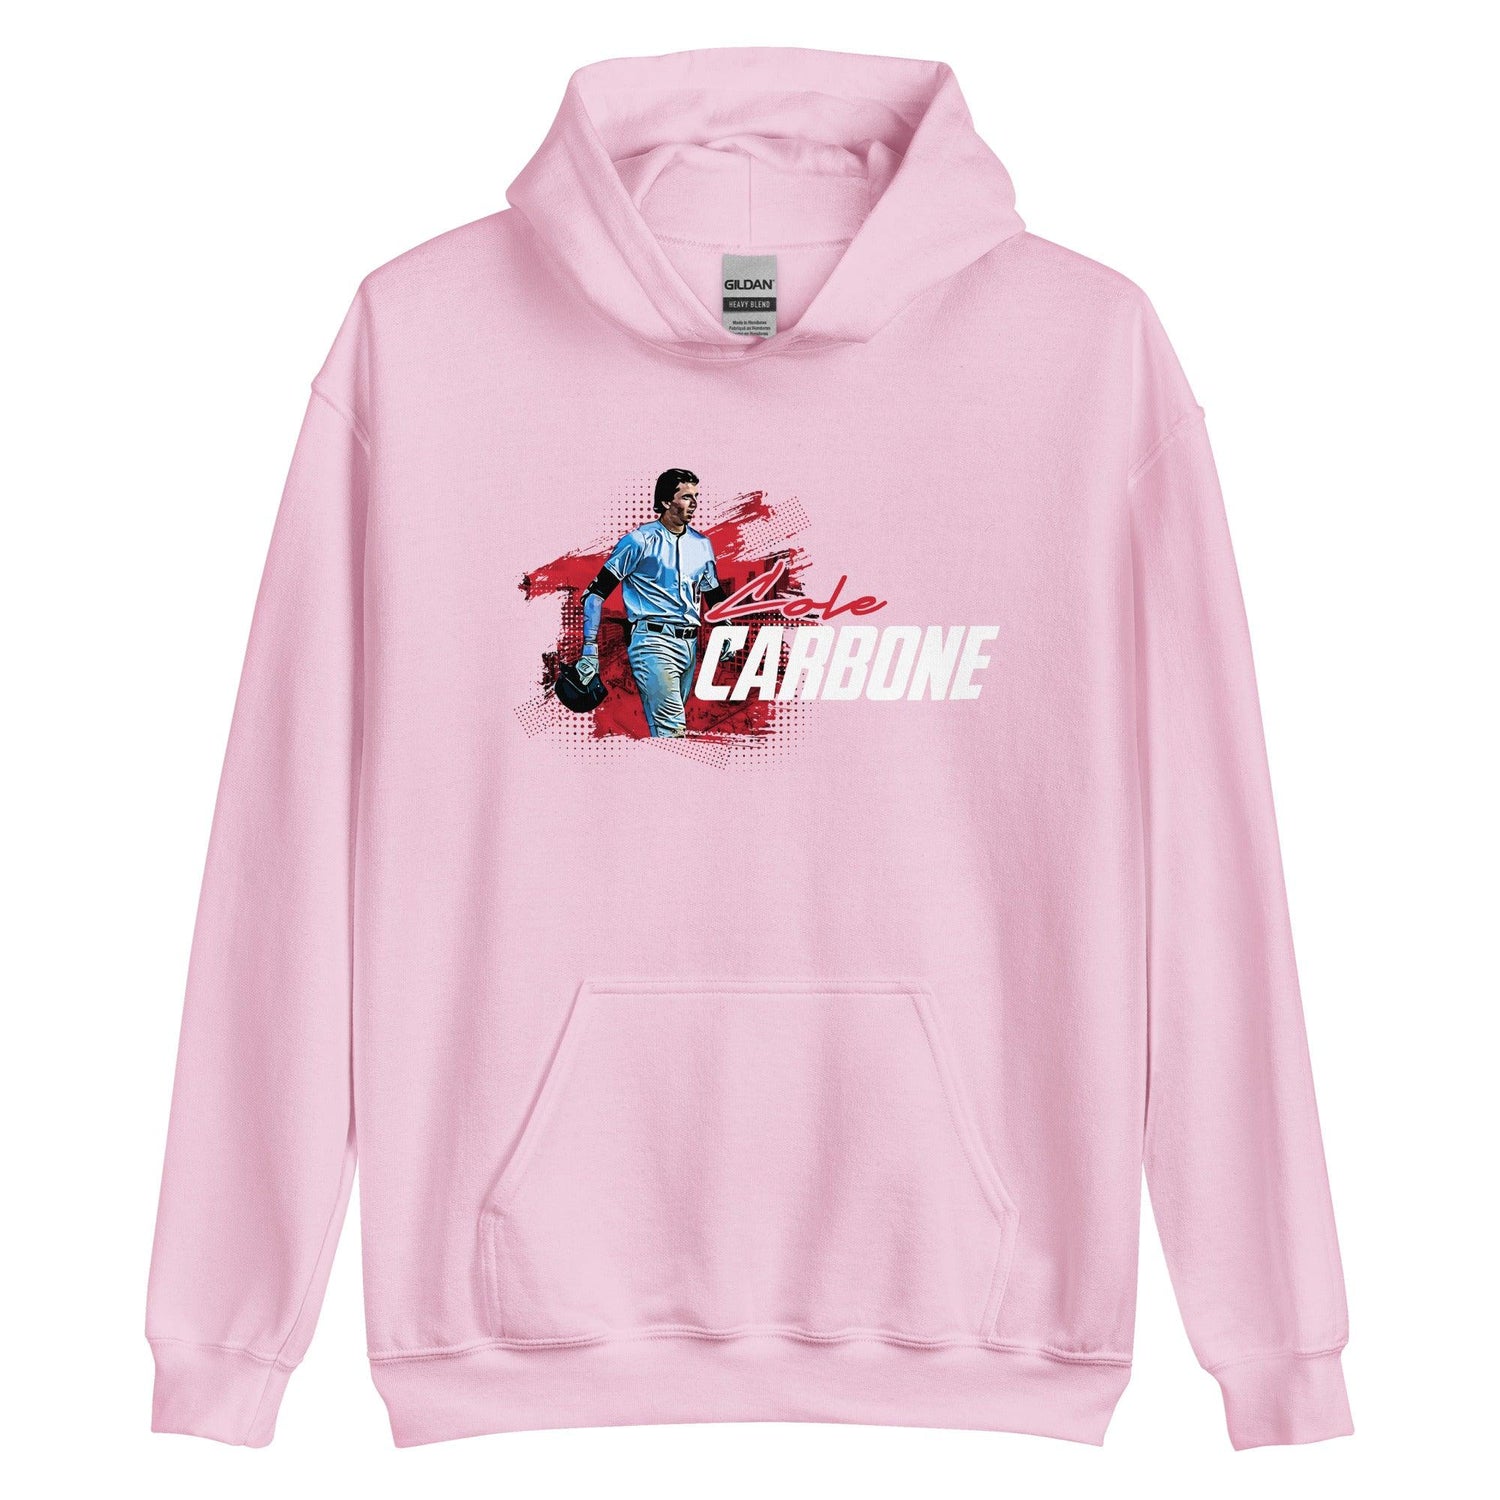 Cole Carbone "Gameday" Hoodie - Fan Arch